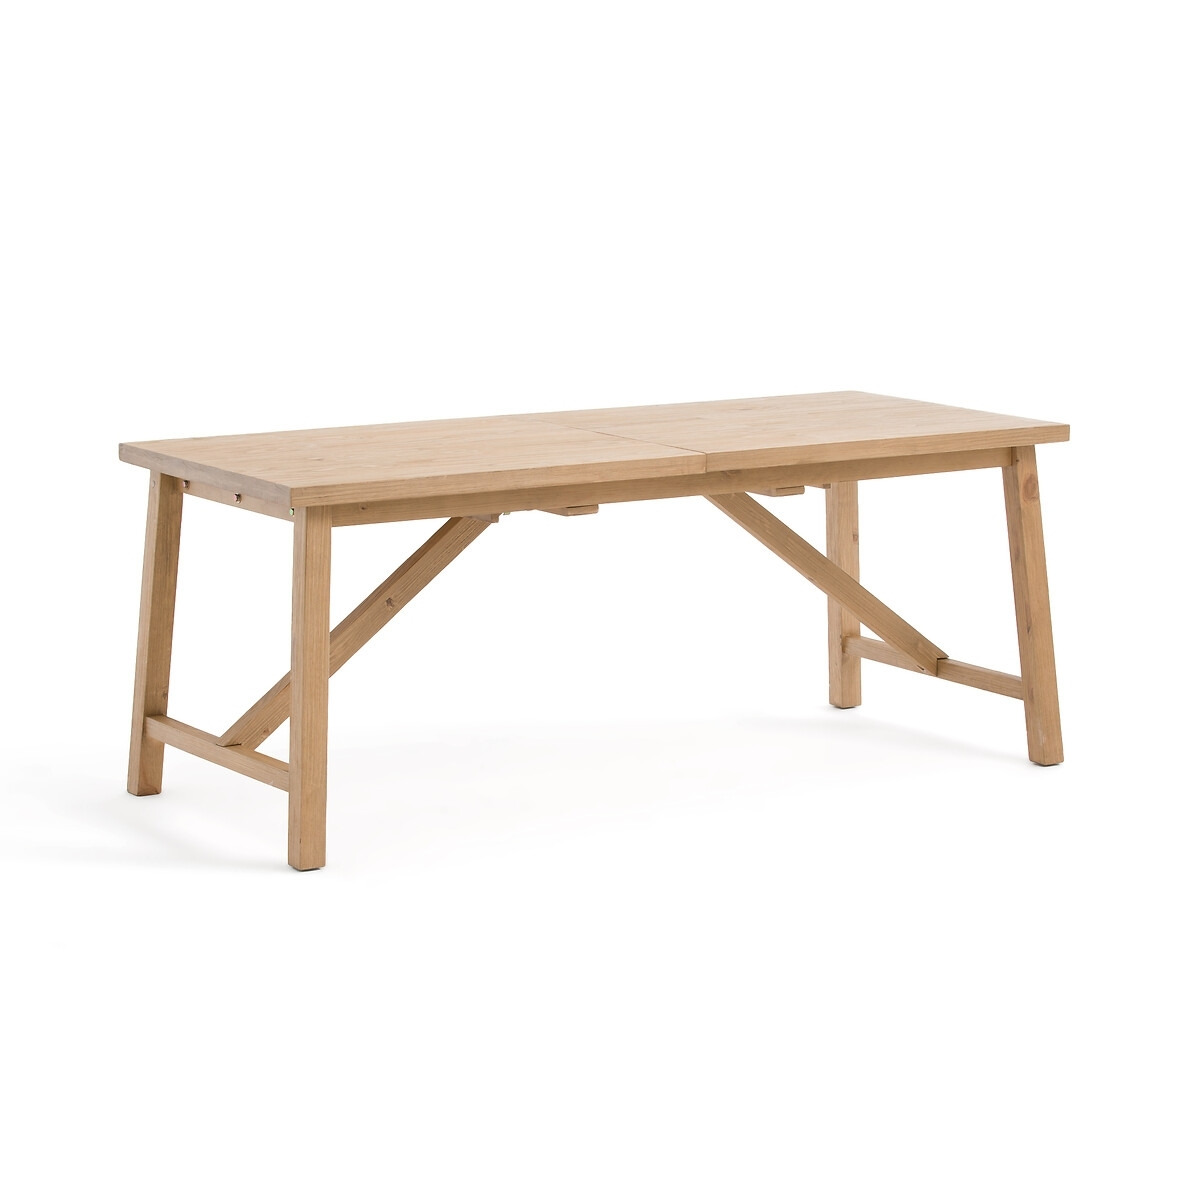 Cinto Extendable Solid Pine Dining Table (Seats 6-8) - image 1